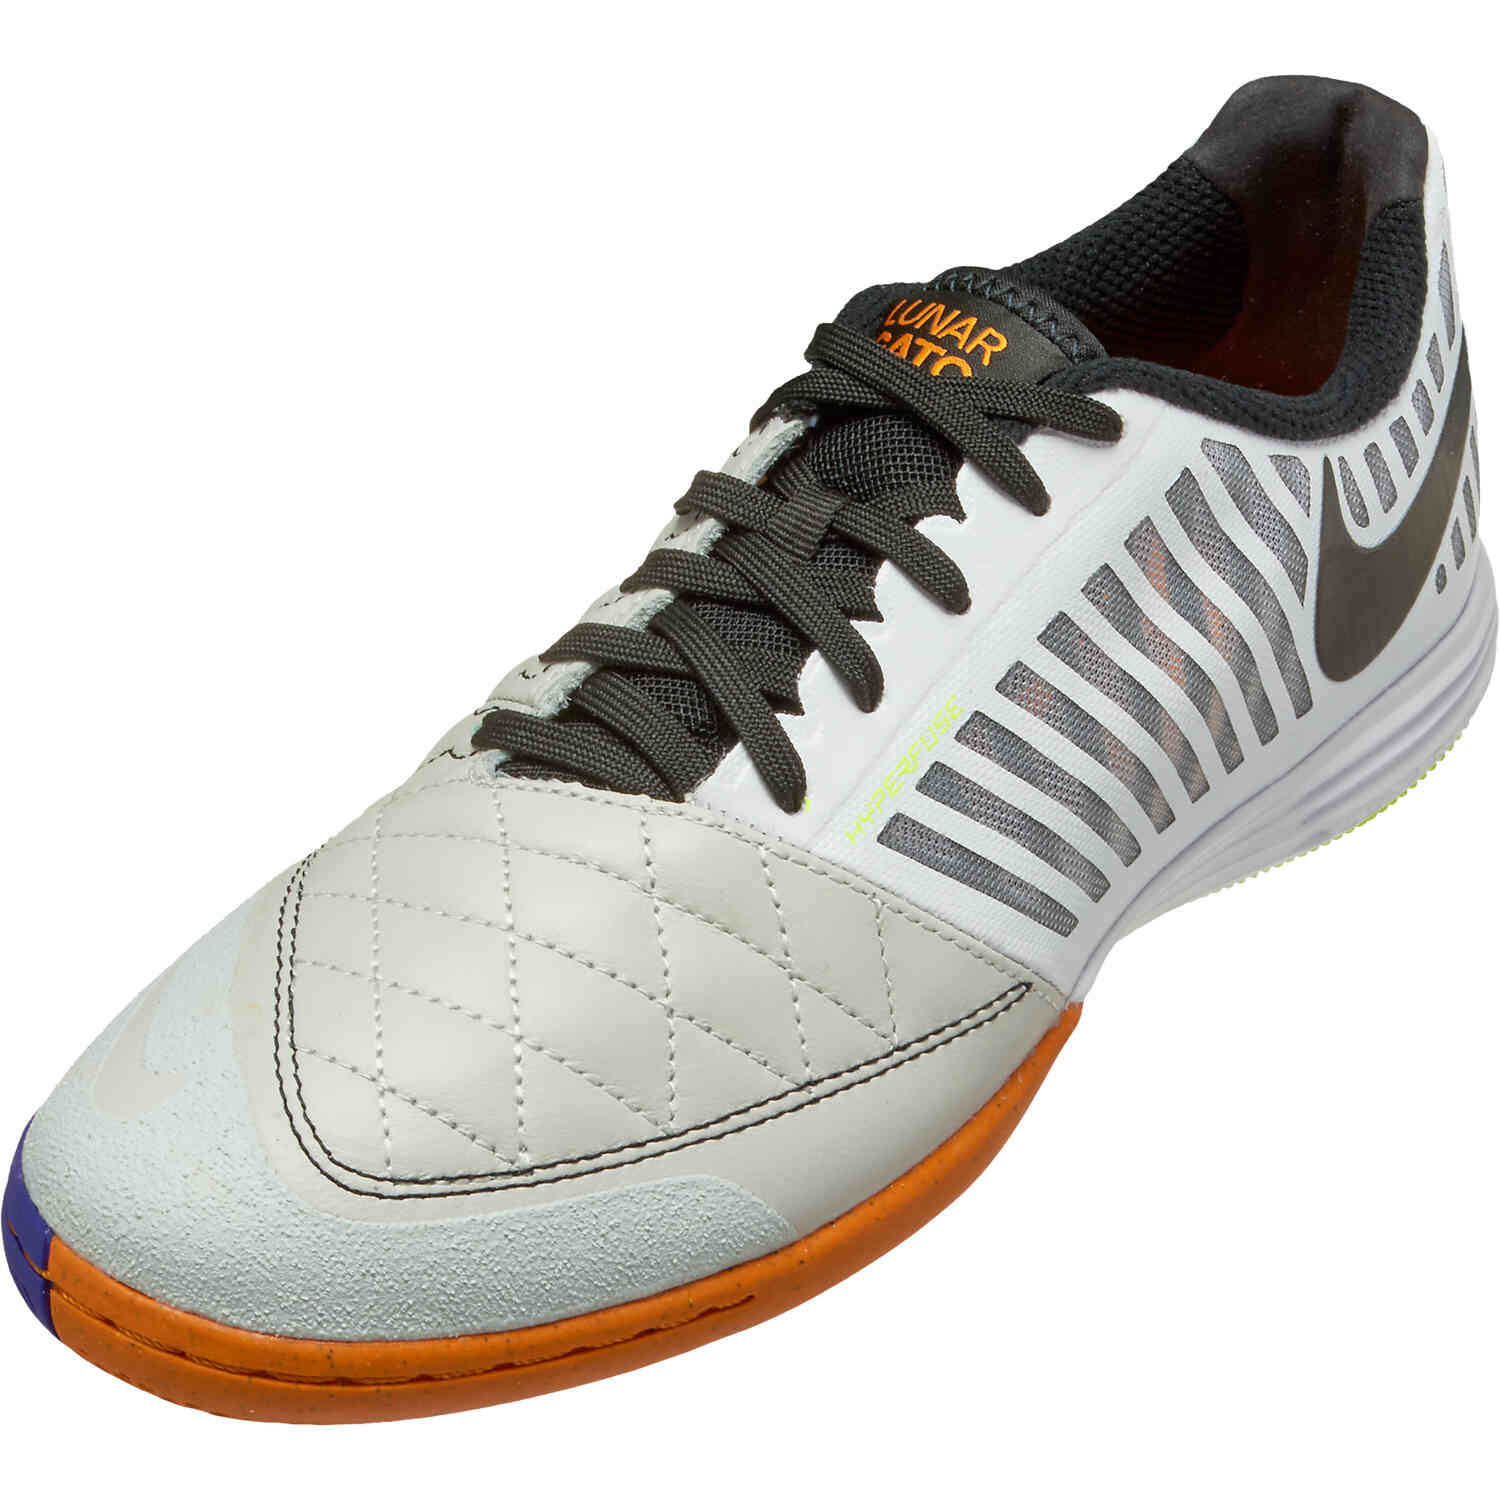 Nike Lunar Gato II IC Indoor Soccer Shoes - White, Black, Photon Dust &  Light Curry - Soccer Master